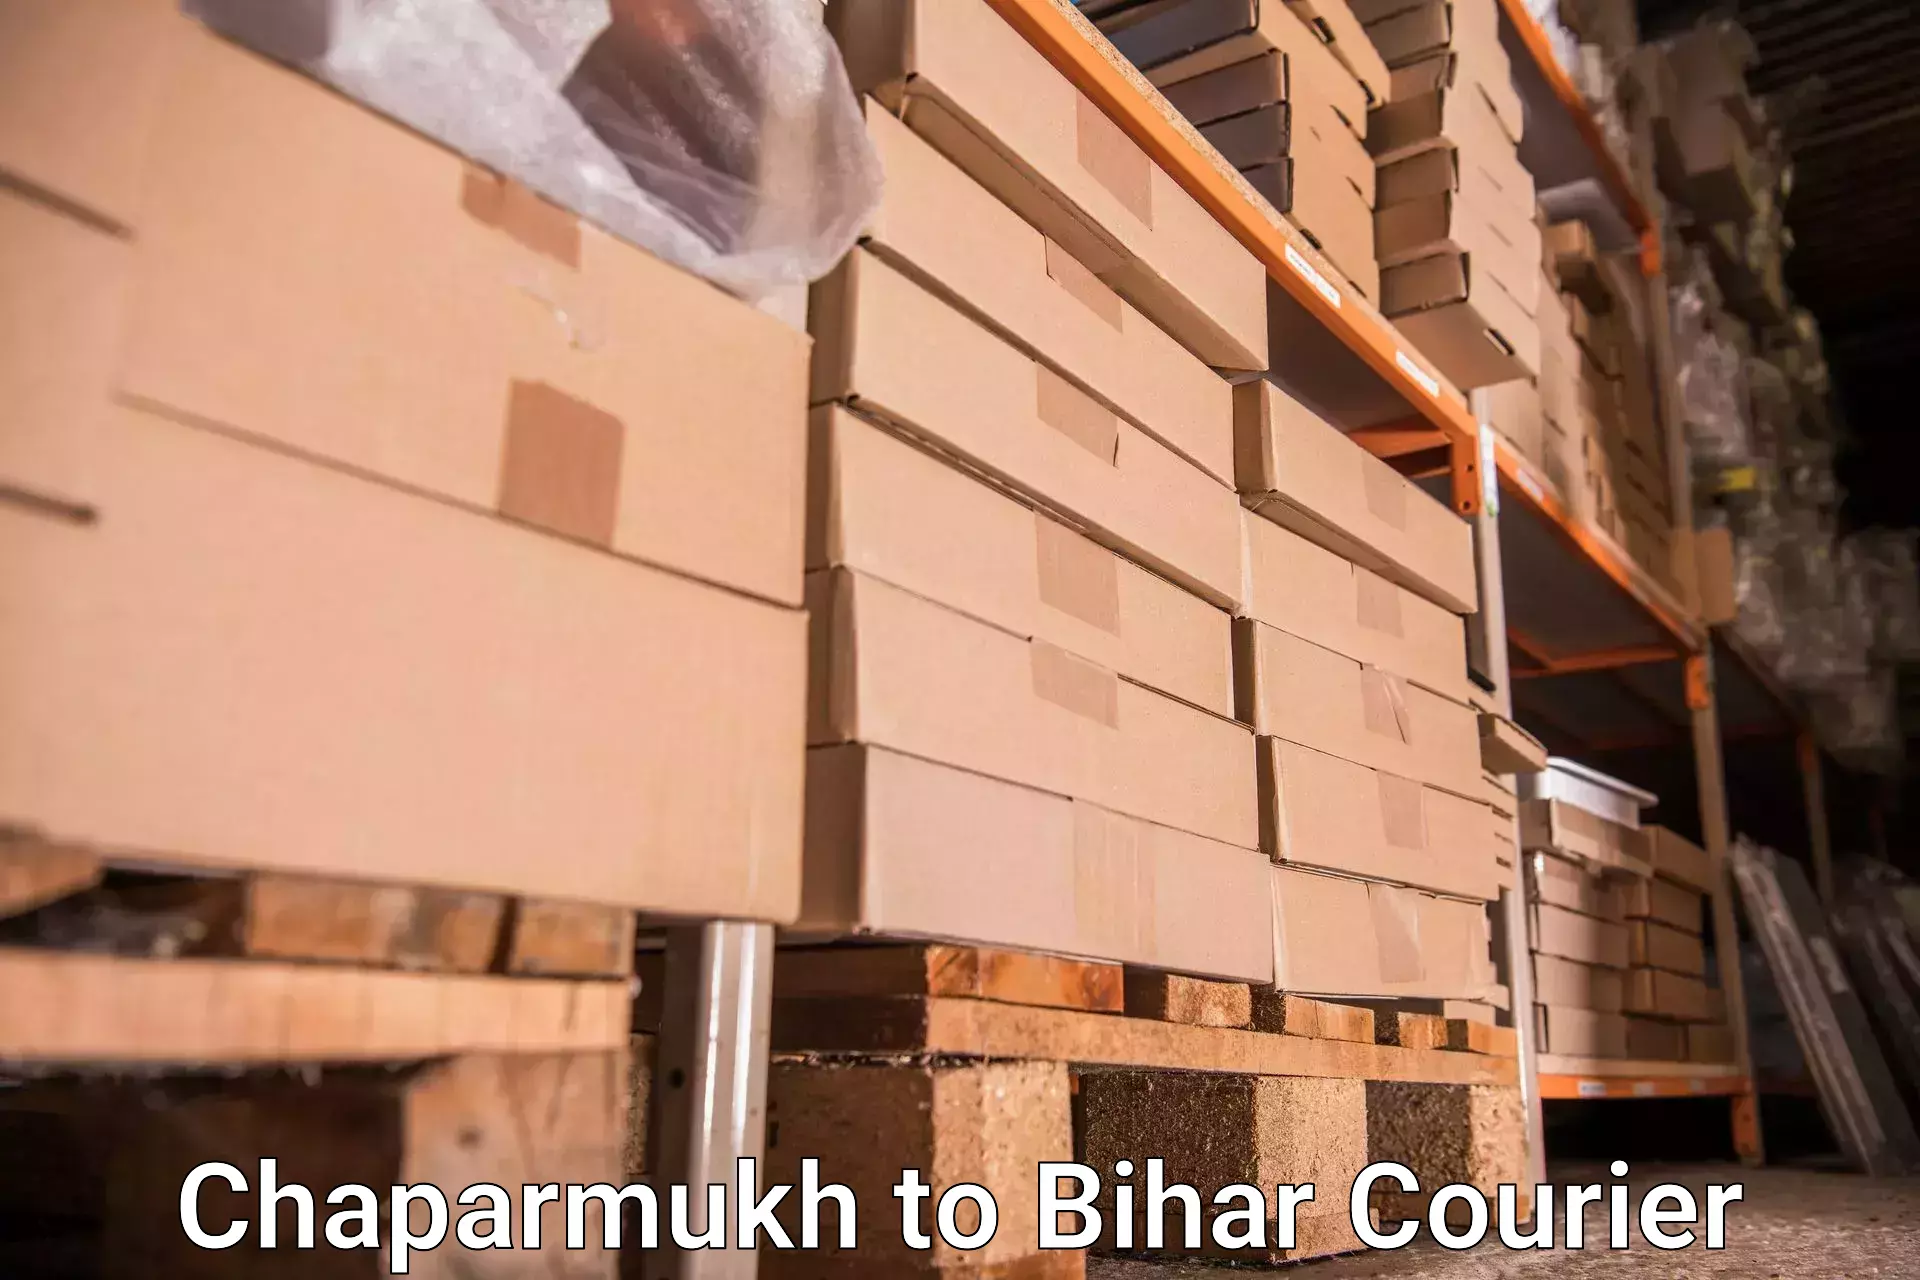 Personal effects shipping Chaparmukh to Bhorey